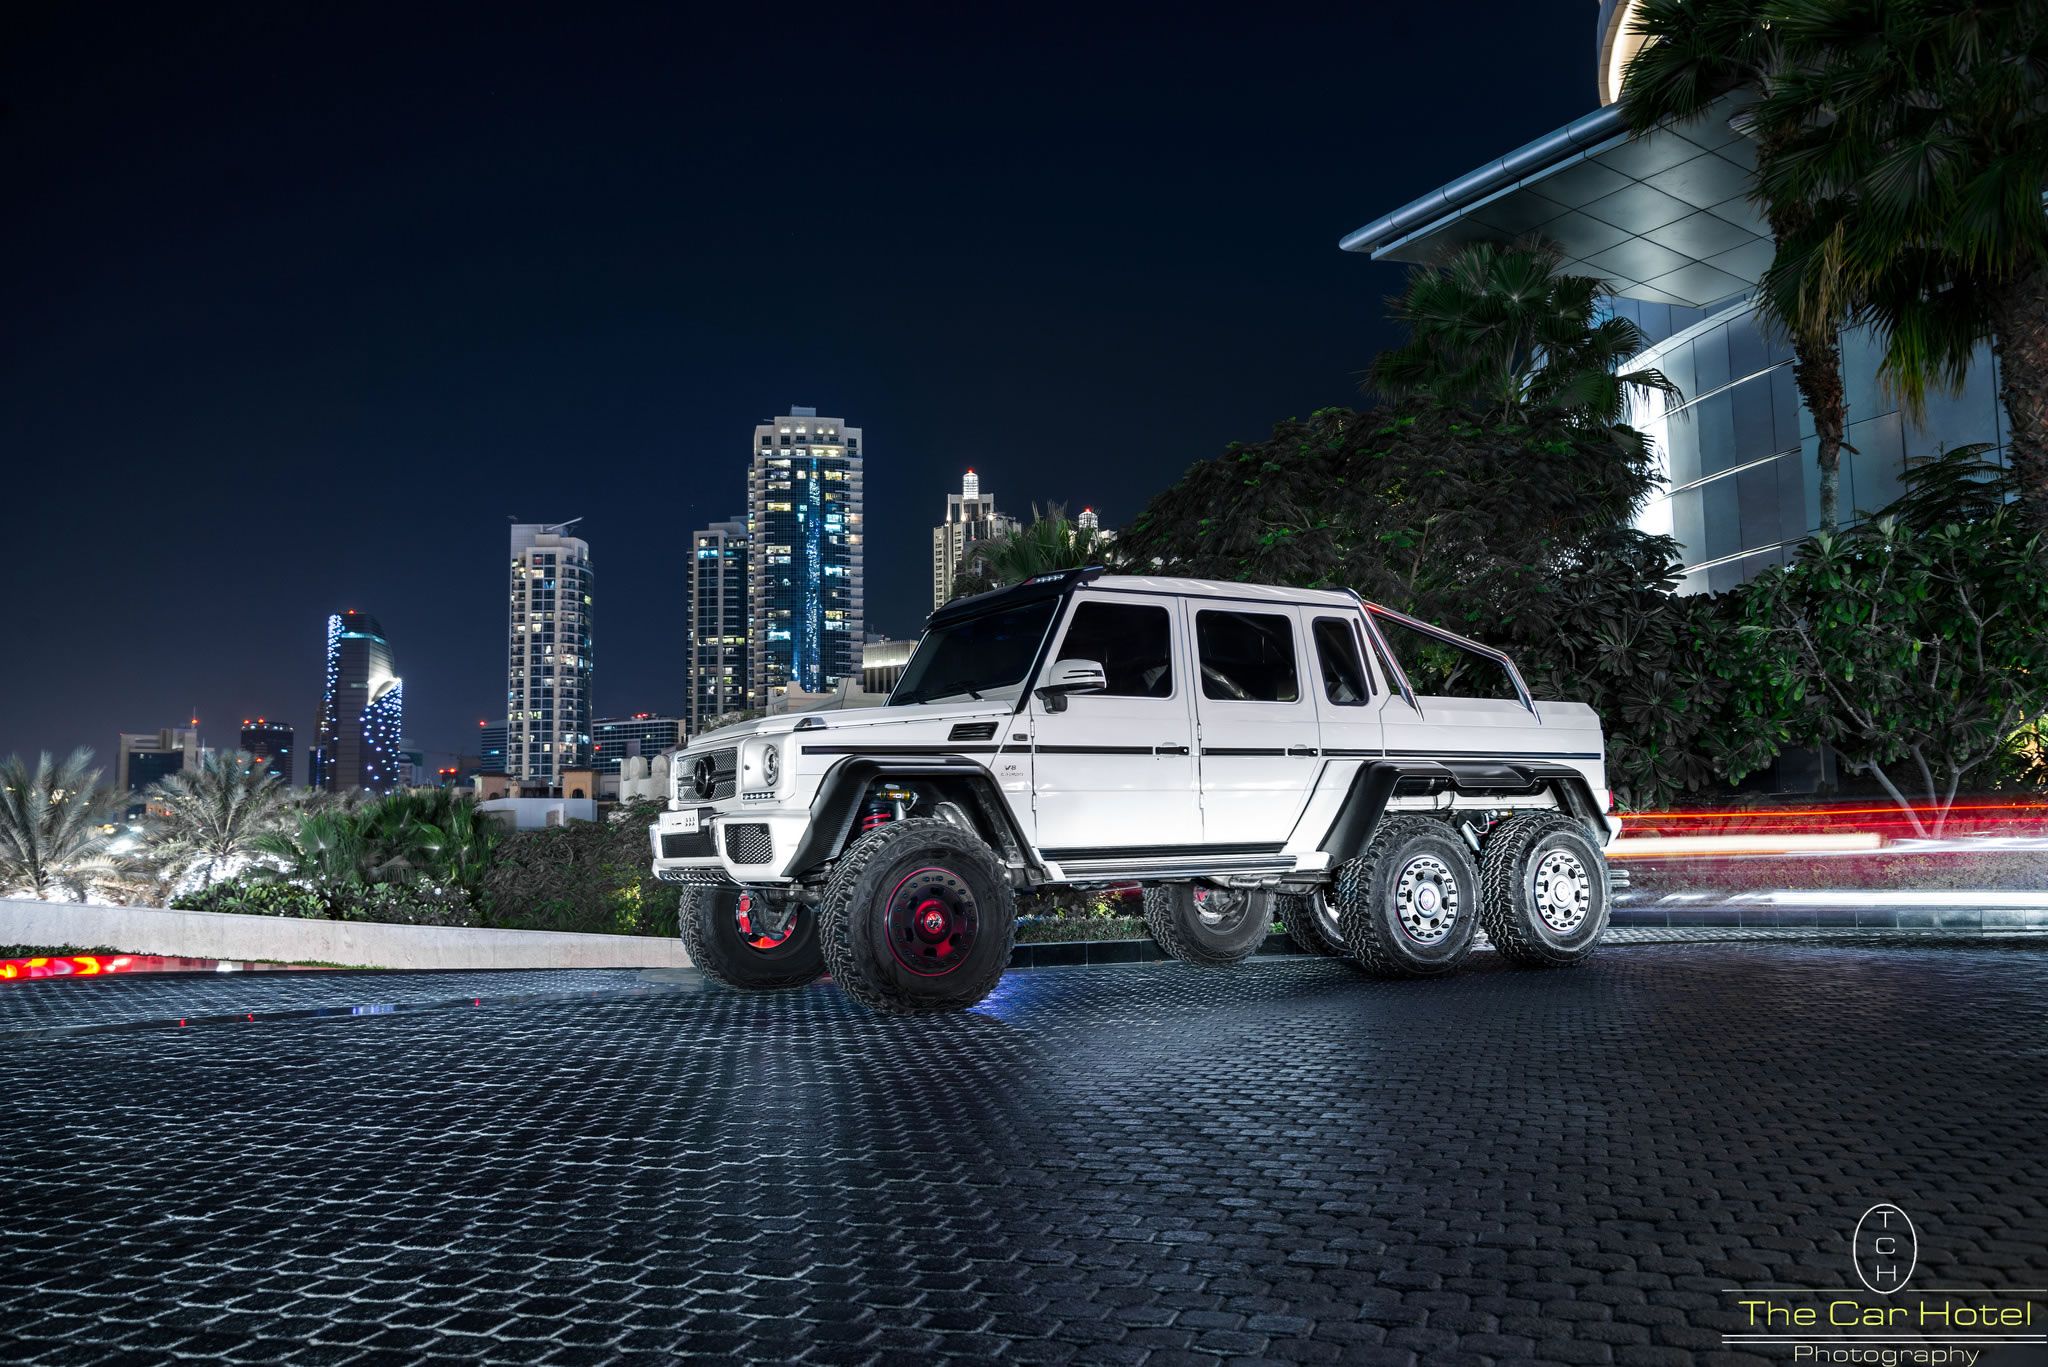 Mercedes Benz G63 AMG 6x6 In White Road Vehicel, Owned By Saudi Arabian